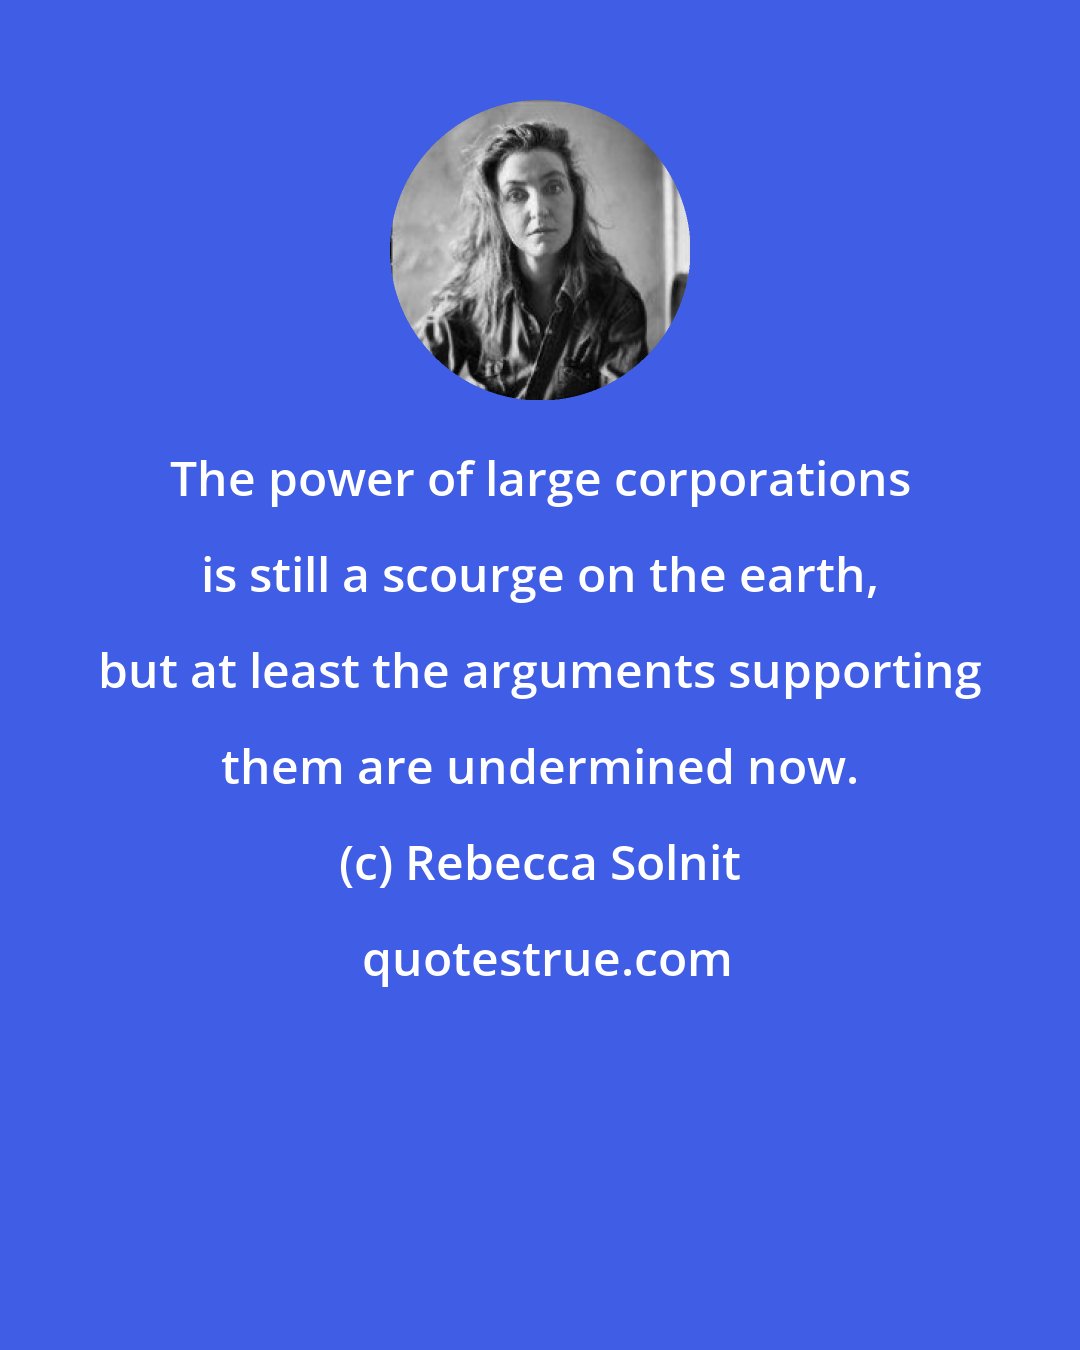 Rebecca Solnit: The power of large corporations is still a scourge on the earth, but at least the arguments supporting them are undermined now.